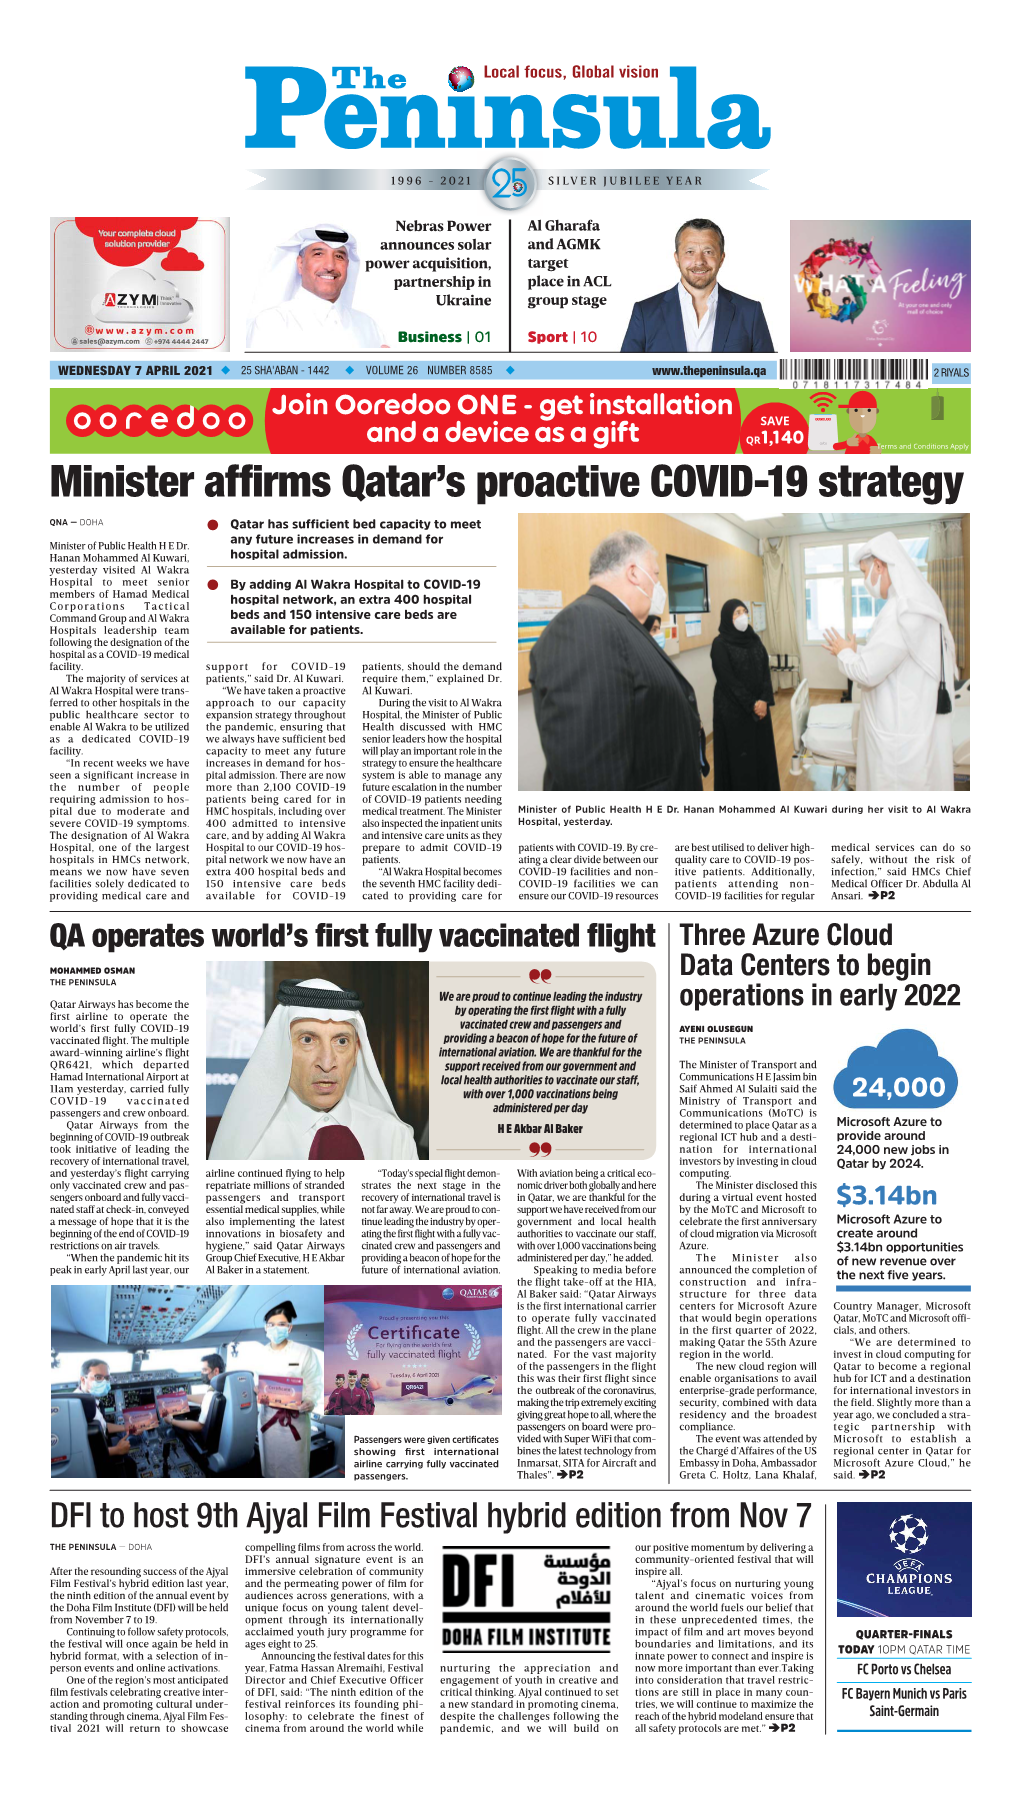 Minister Affirms Qatar's Proactive COVID-19 Strategy